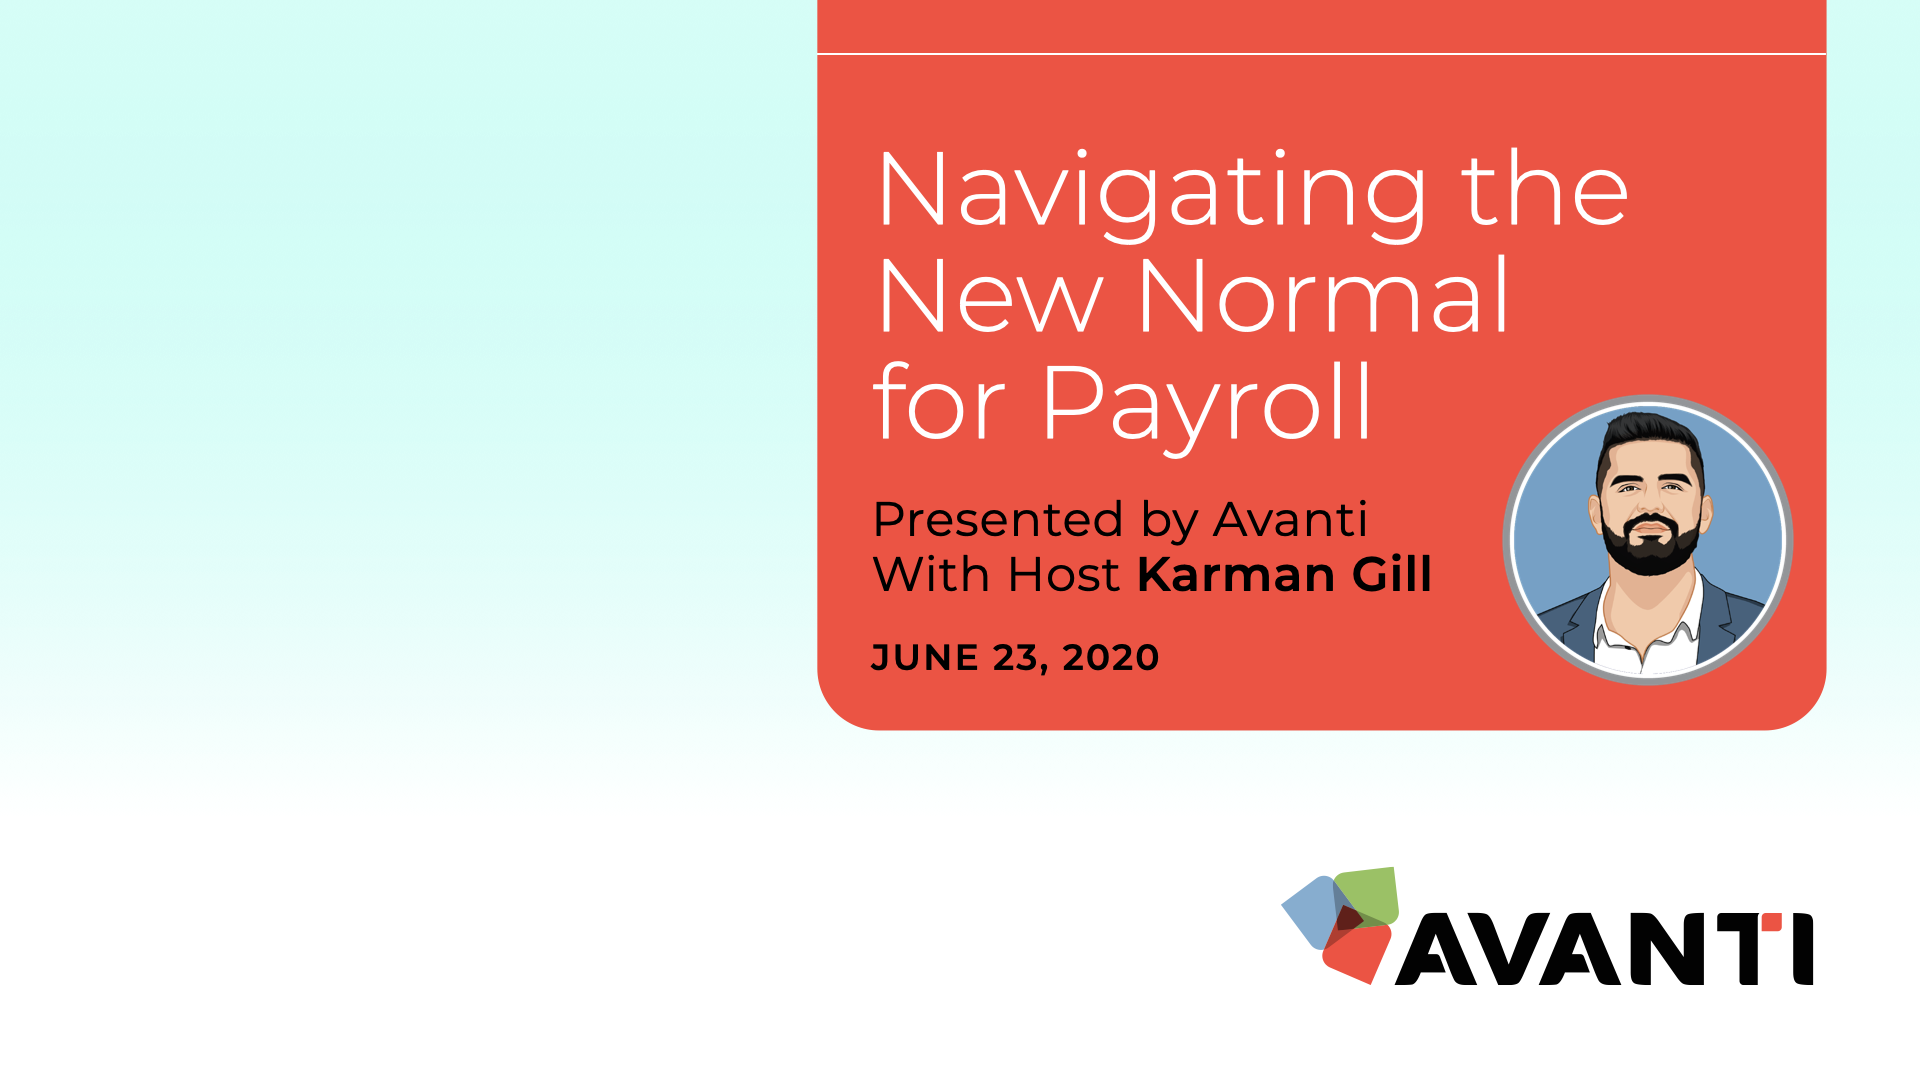 Canadian Payroll Roundtable Discussion: Navigating the New Normal